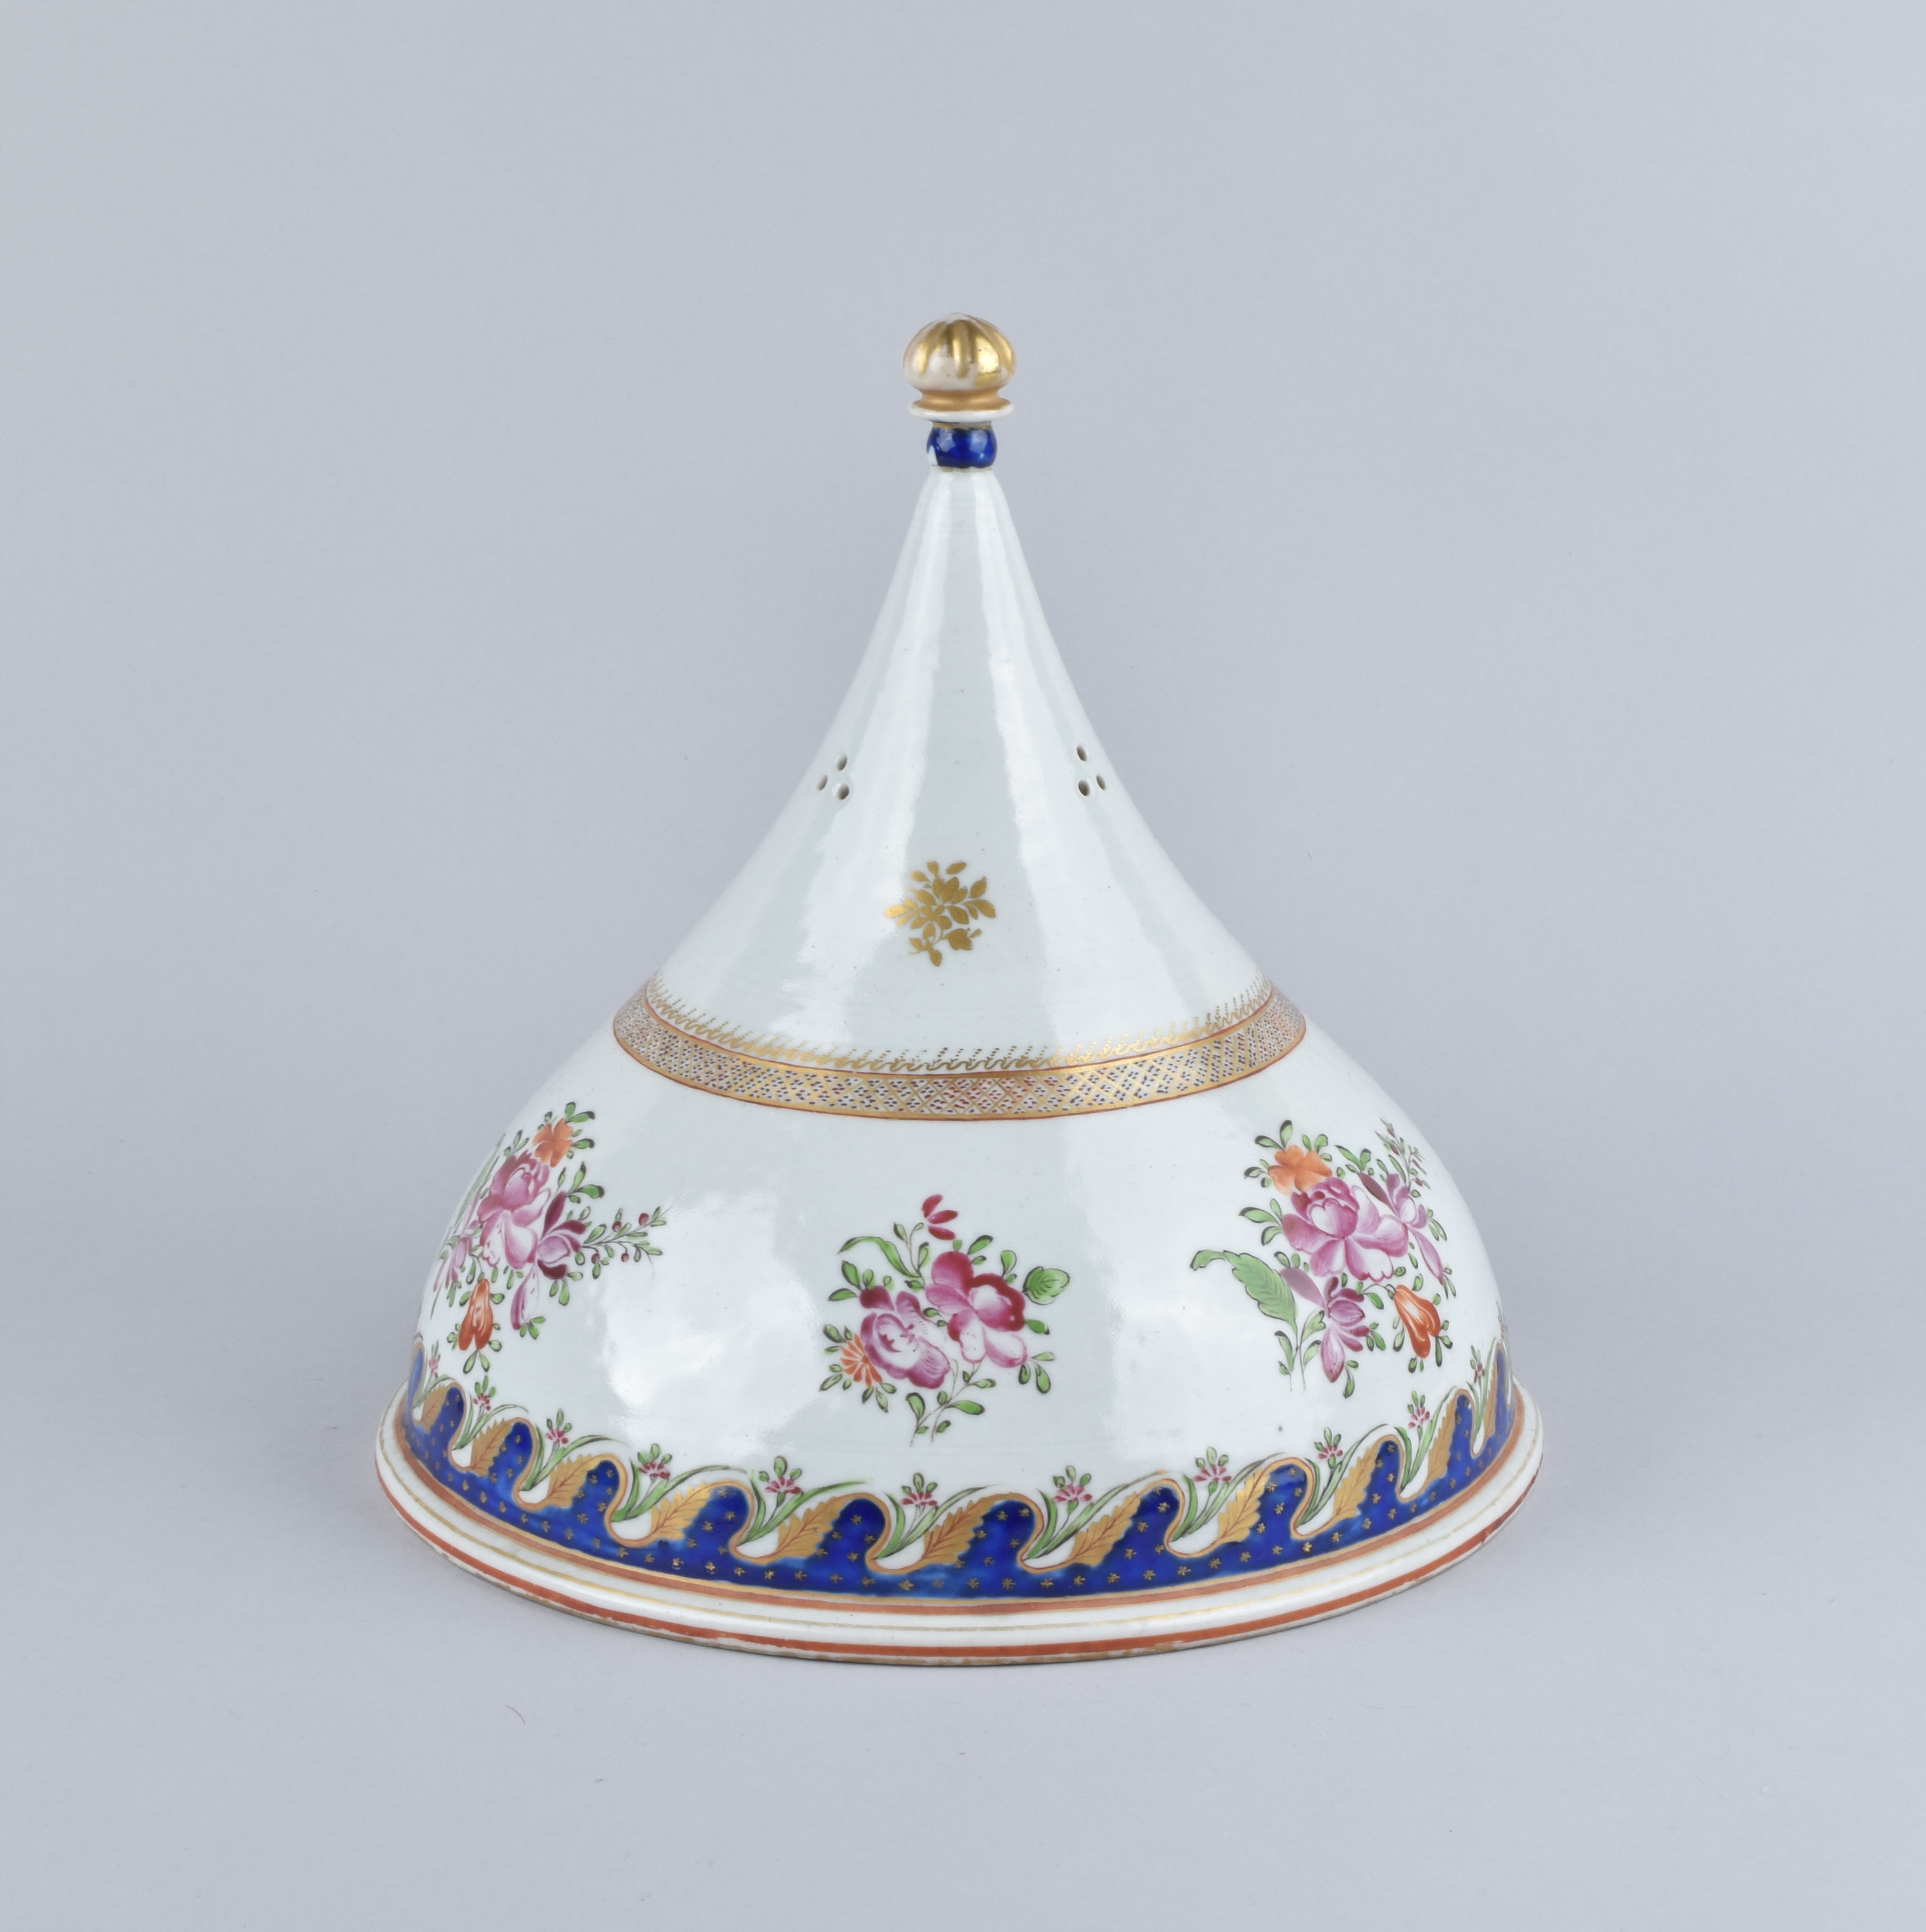 Porcelaine Late 18th century, China